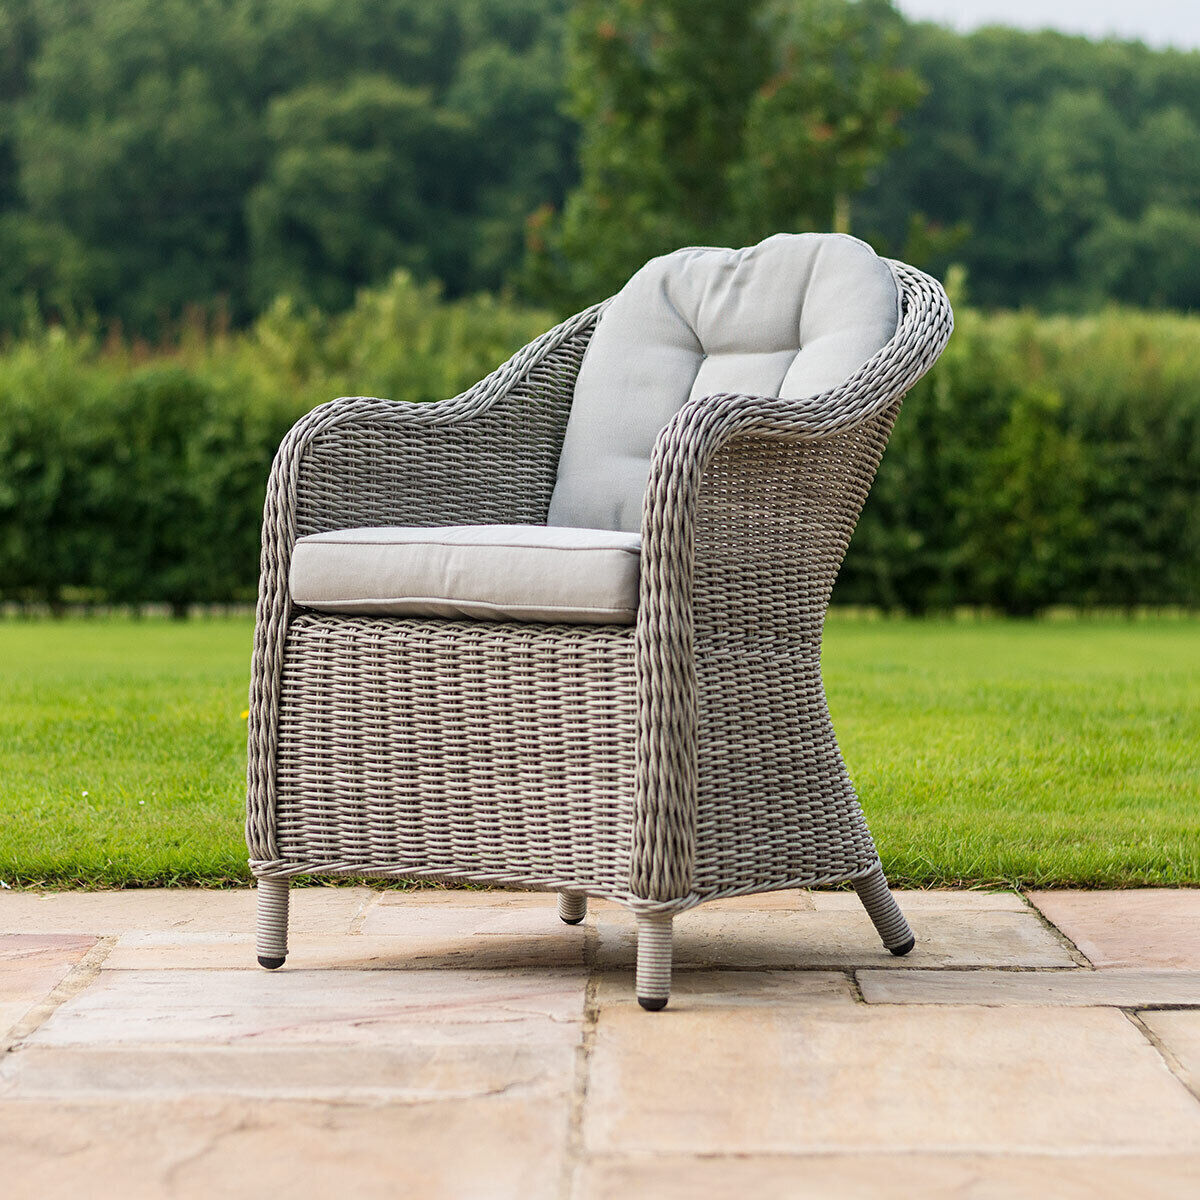 Maze - Oxford Heritage 4 Seat Round Rattan Dining Set product image